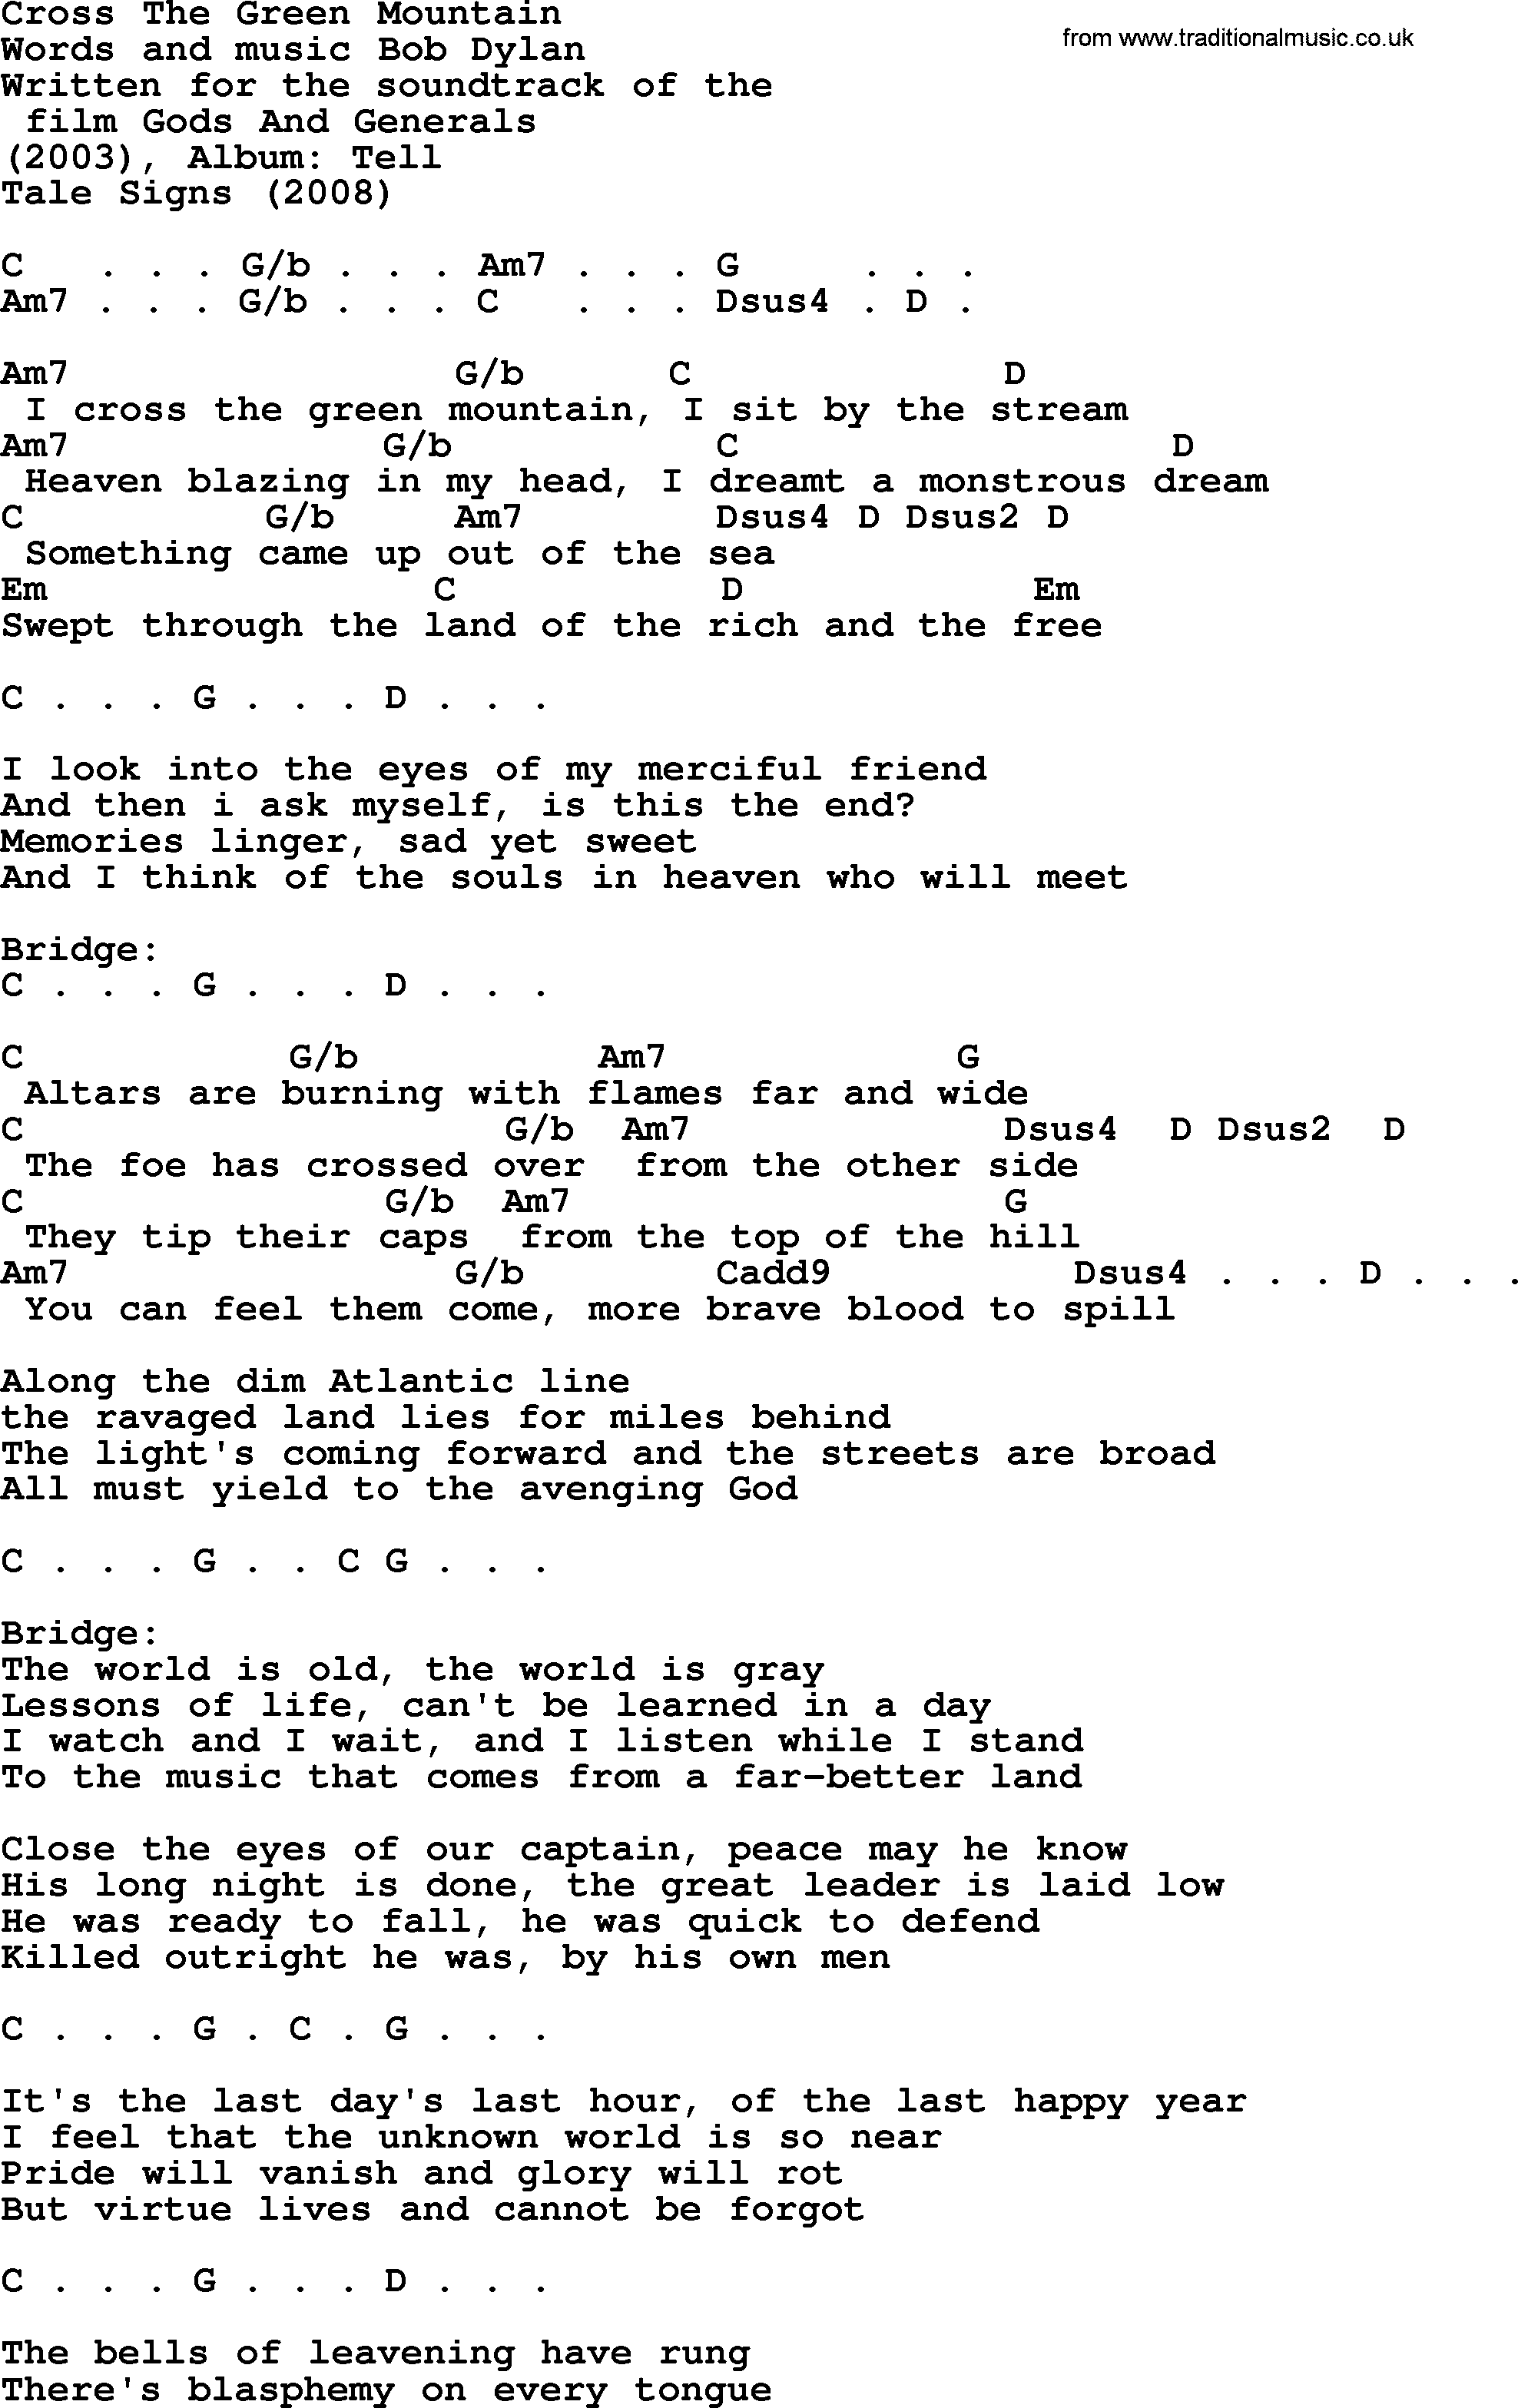 Bob Dylan song, lyrics with chords - Cross The Green Mountain